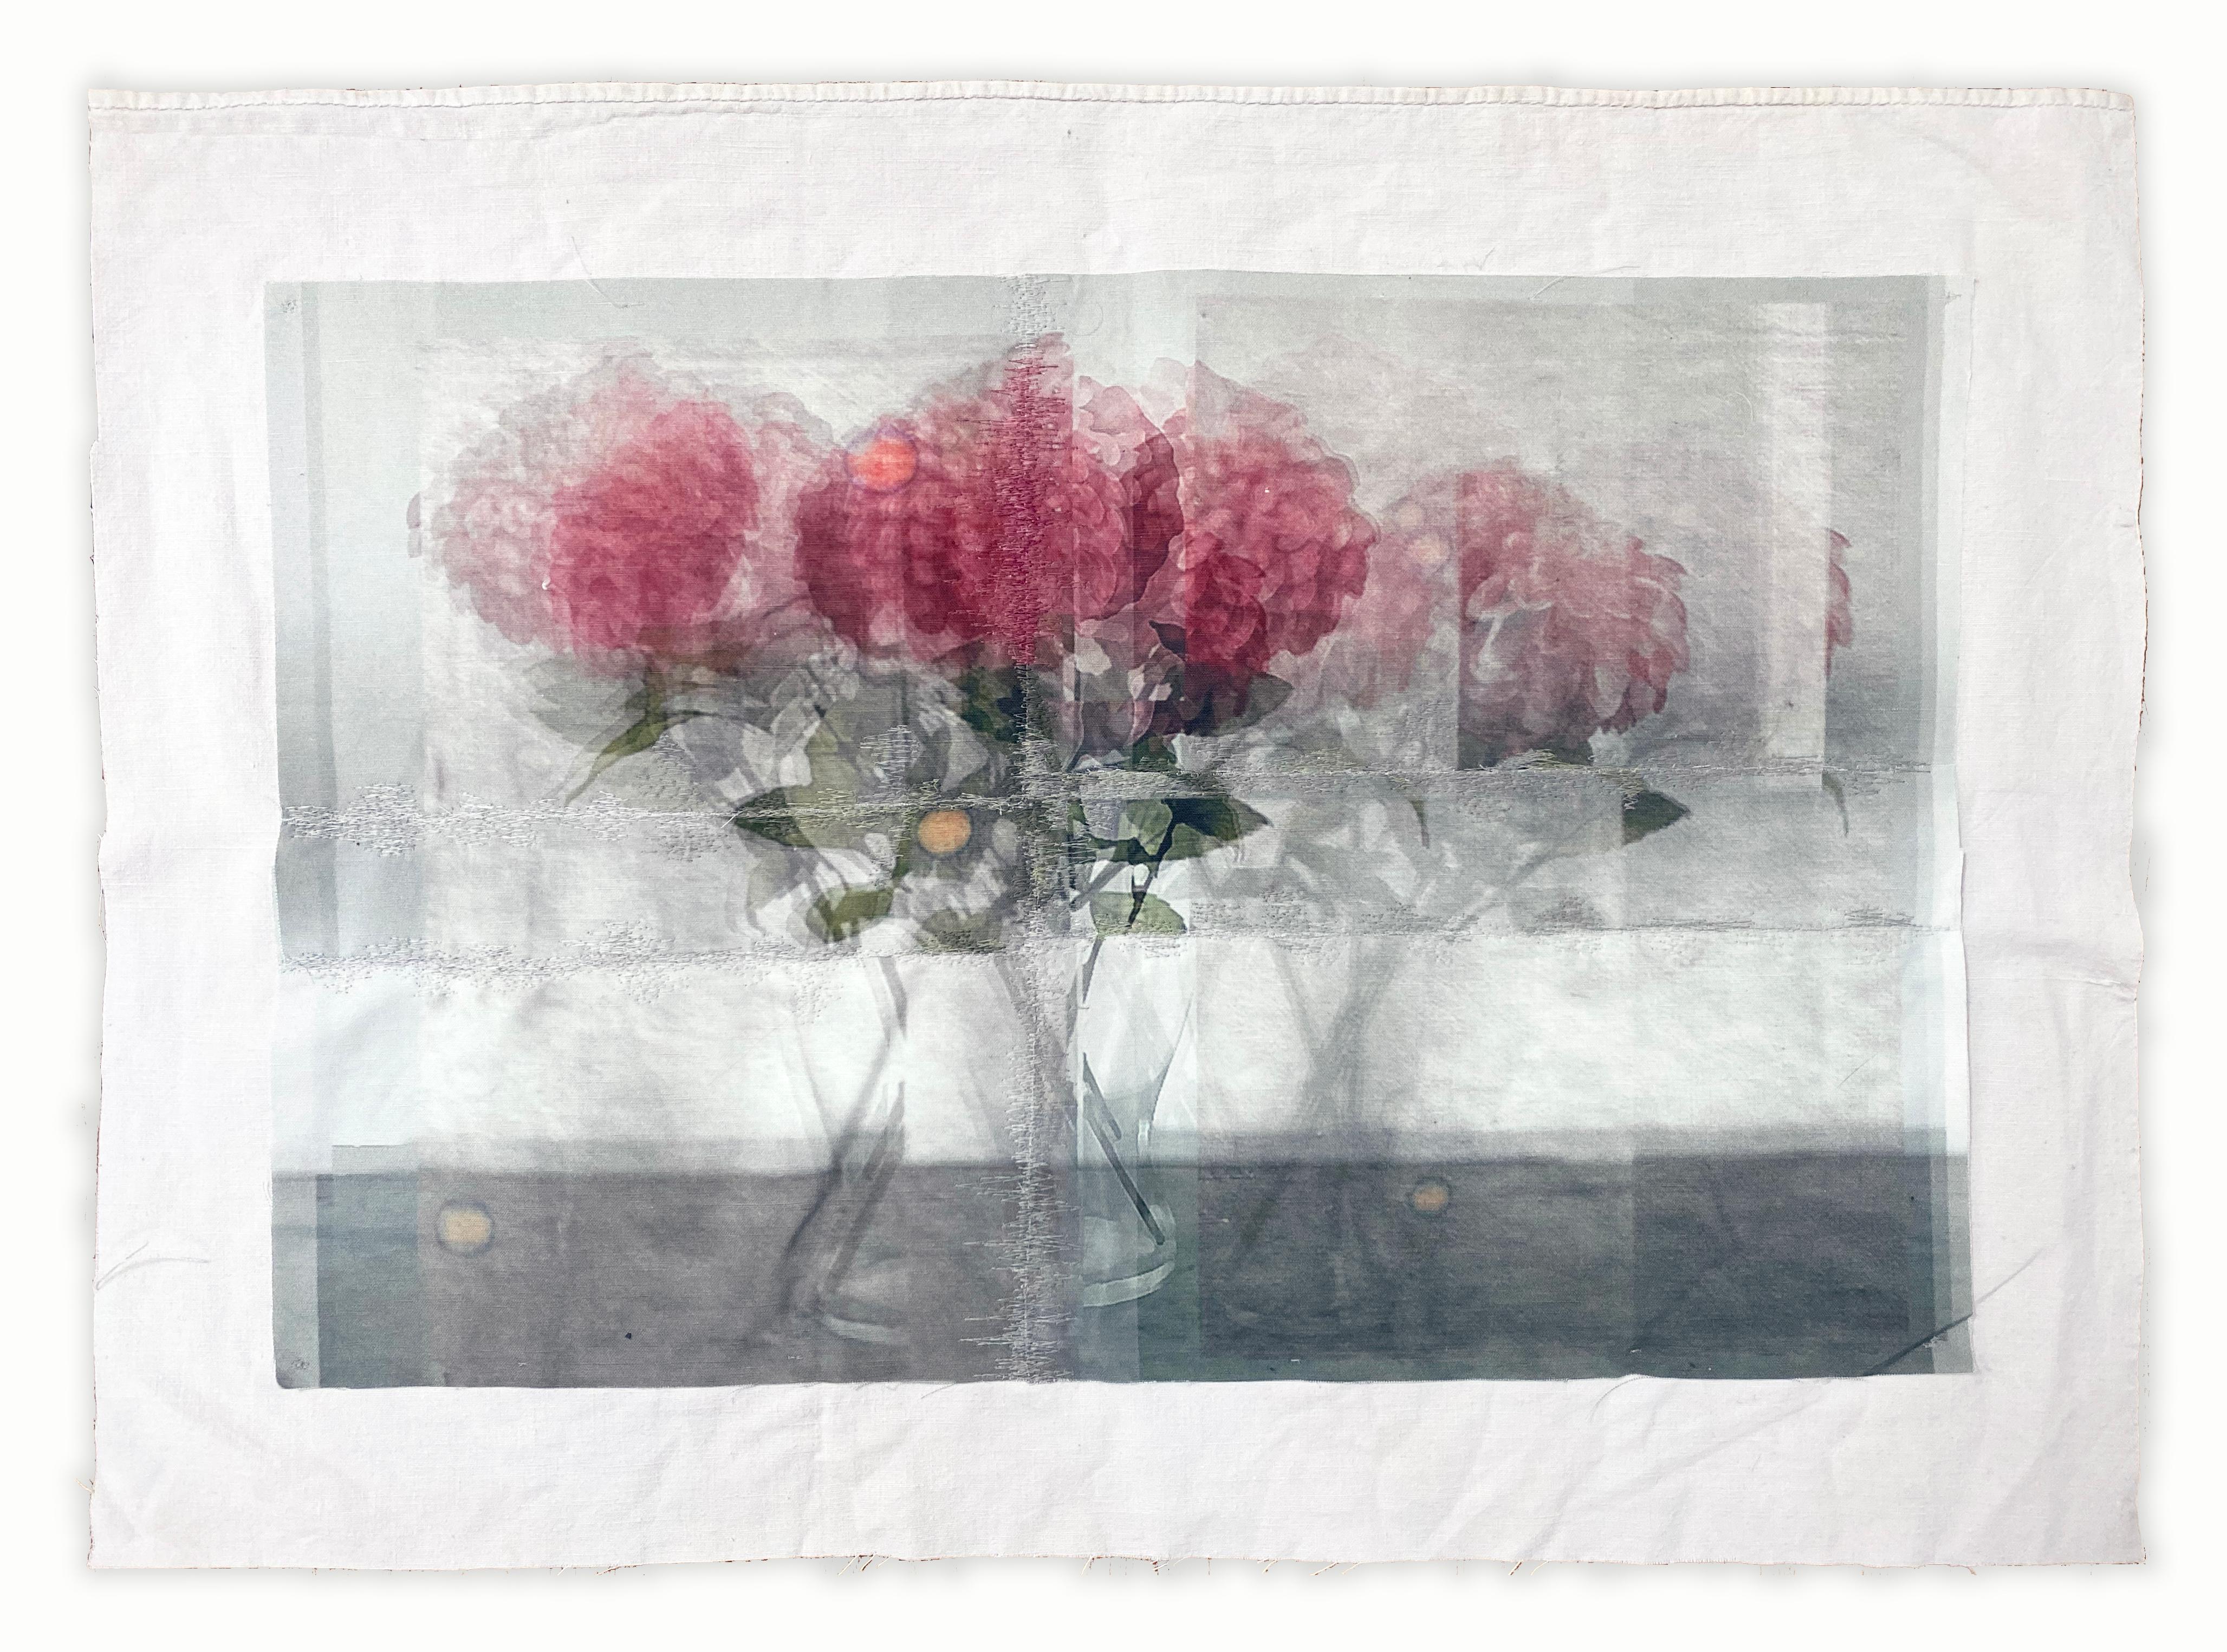 Offering Flower- pink white contemporary photo transfer and thread on fabric - Mixed Media Art by Michele Landel